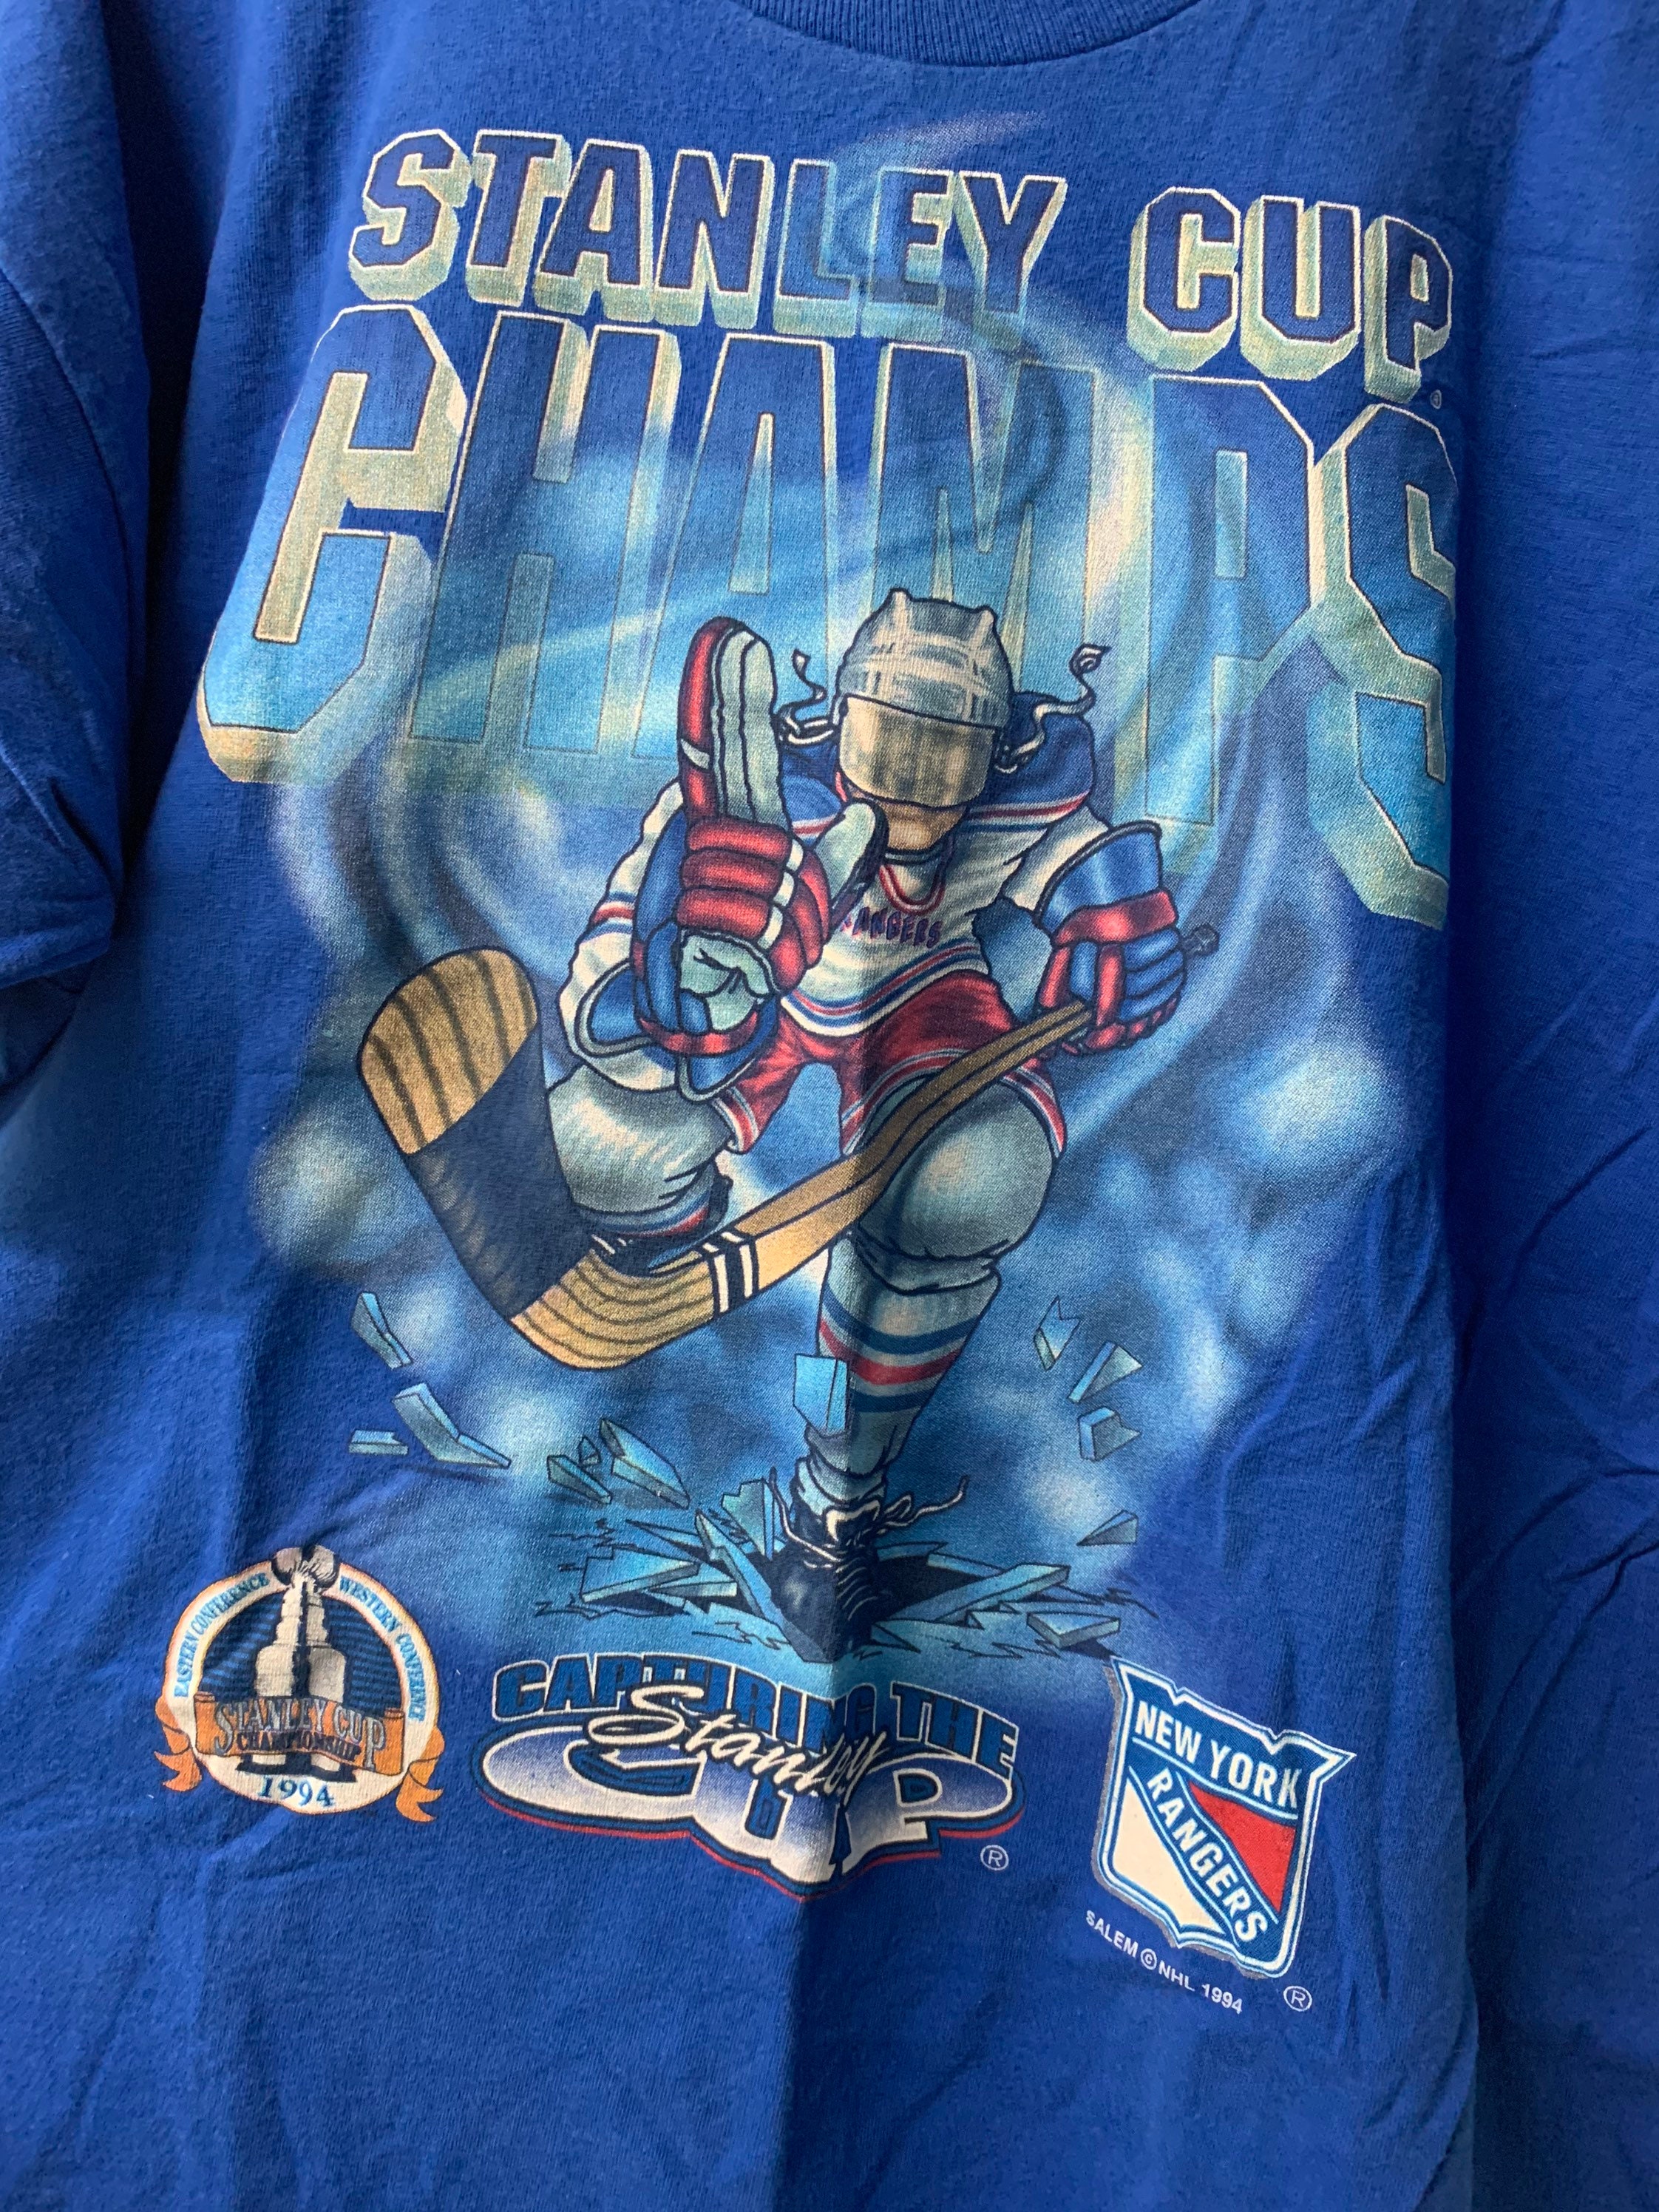 Buy Vintage 90s New York Rangers 1994 NHL Stanley Cup T-shirt Online in  India 